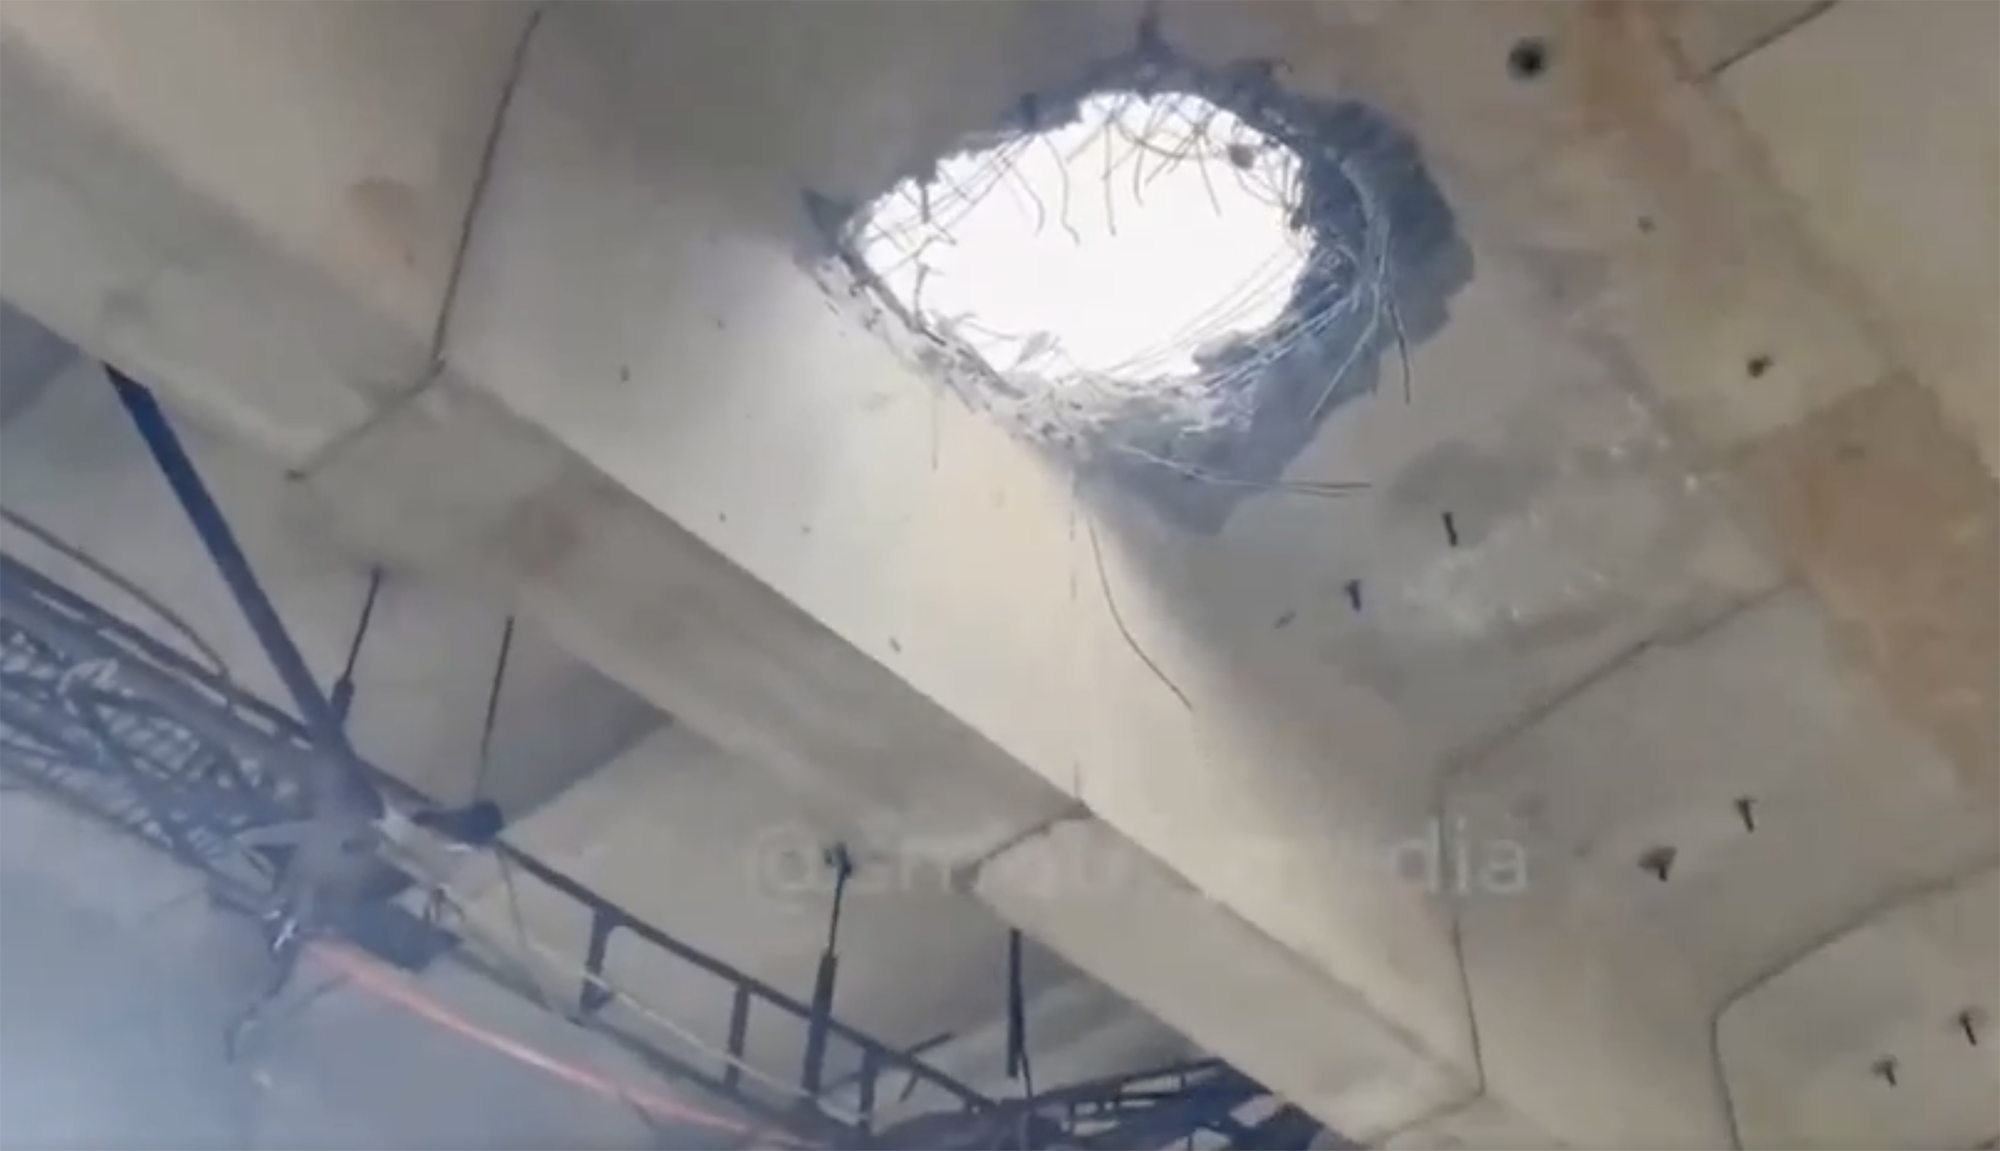 The Antonovskiy bridge to the largely Russian-occupied Kherson region in southern Ukraine has been shelled by Ukrainian forces, seen in this video grab released July 19.